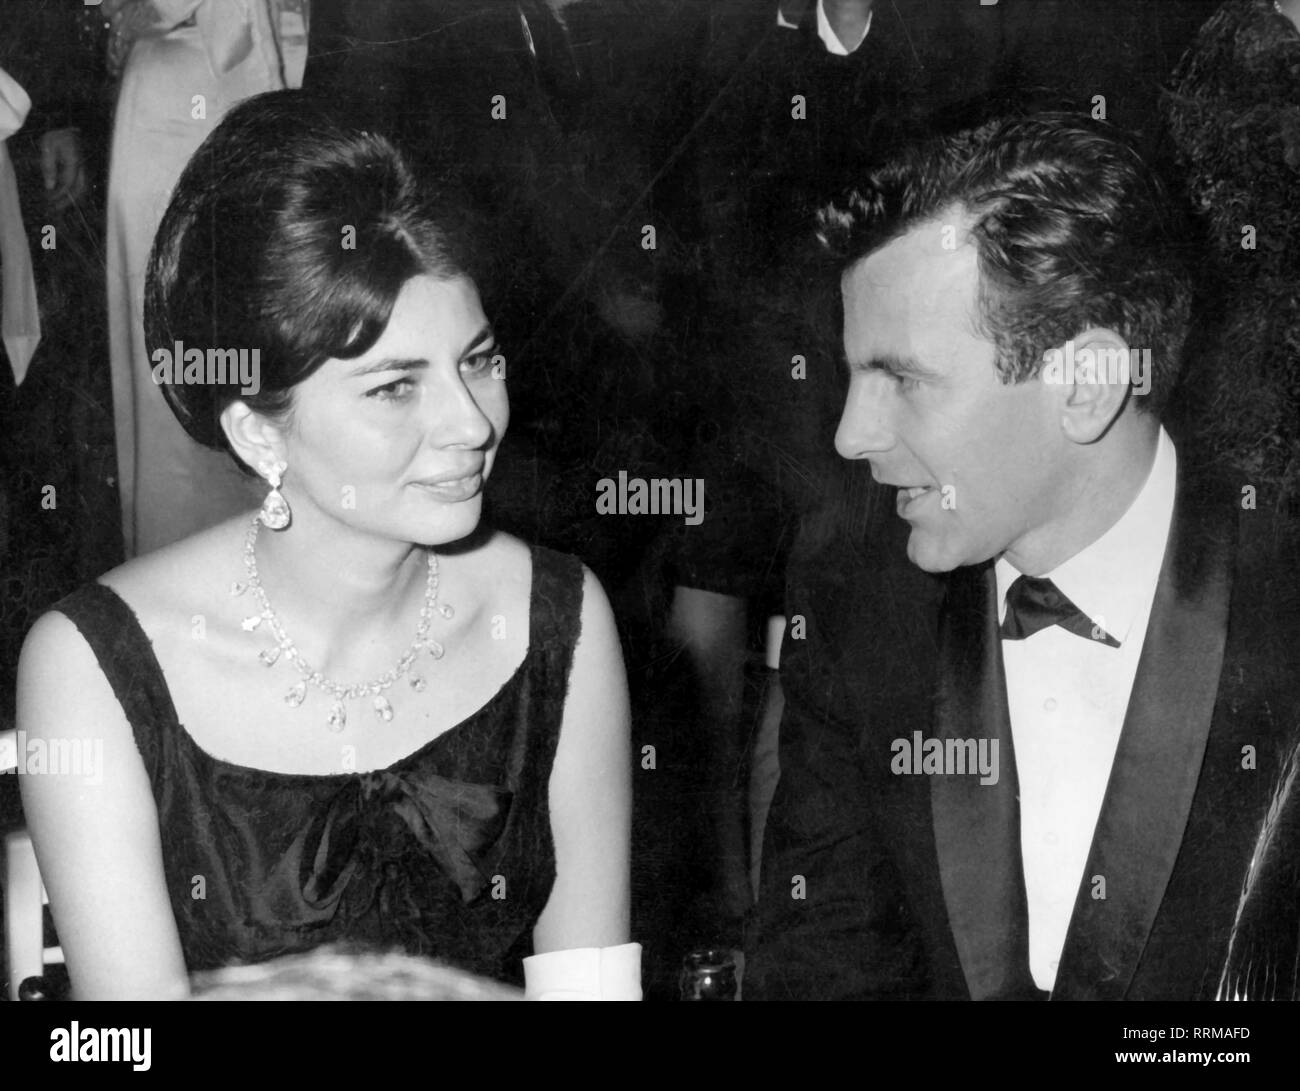 Soraya, 22.6.1932 - 25.10.2001, Empress of Persia 12.2.1951 - 6.4.1958, half length, in conversation with the actor Maximilian Schell, re-opening of the National Theatre in Munich, 23.11.1963, Additional-Rights-Clearance-Info-Not-Available Stock Photo